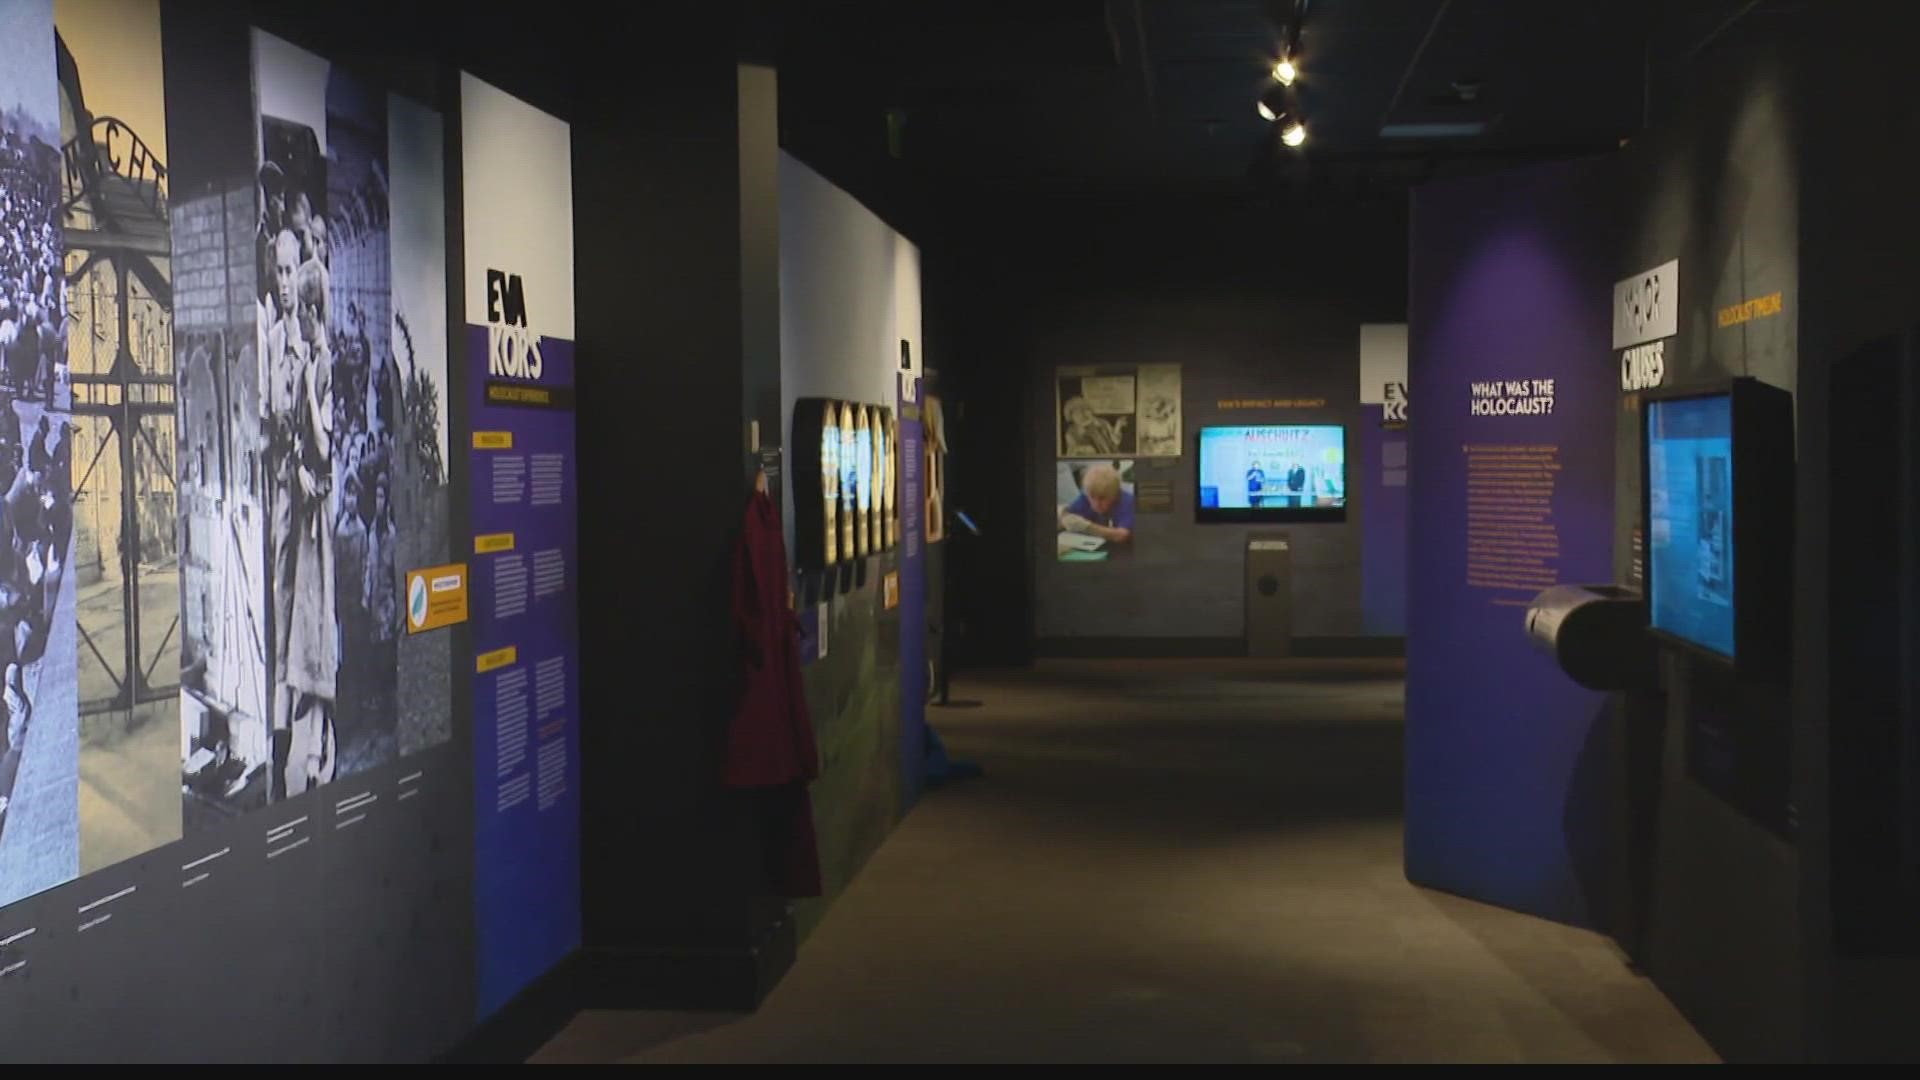 The exhibit features a virtual reality tour of Auschwitz with the Holocaust survivor.